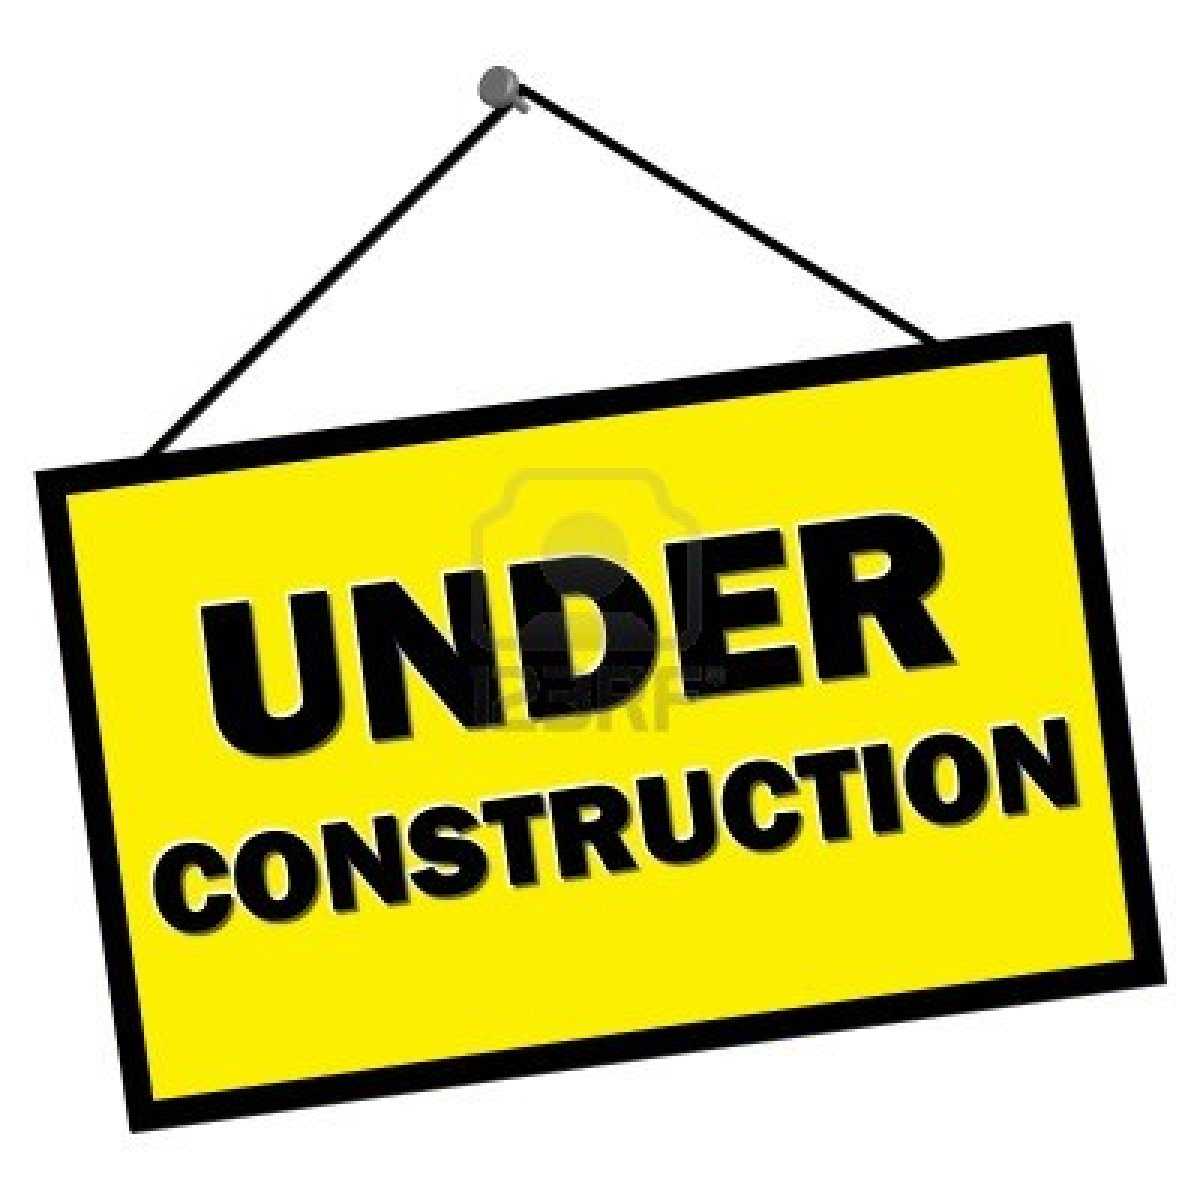 free clipart images under construction - photo #38